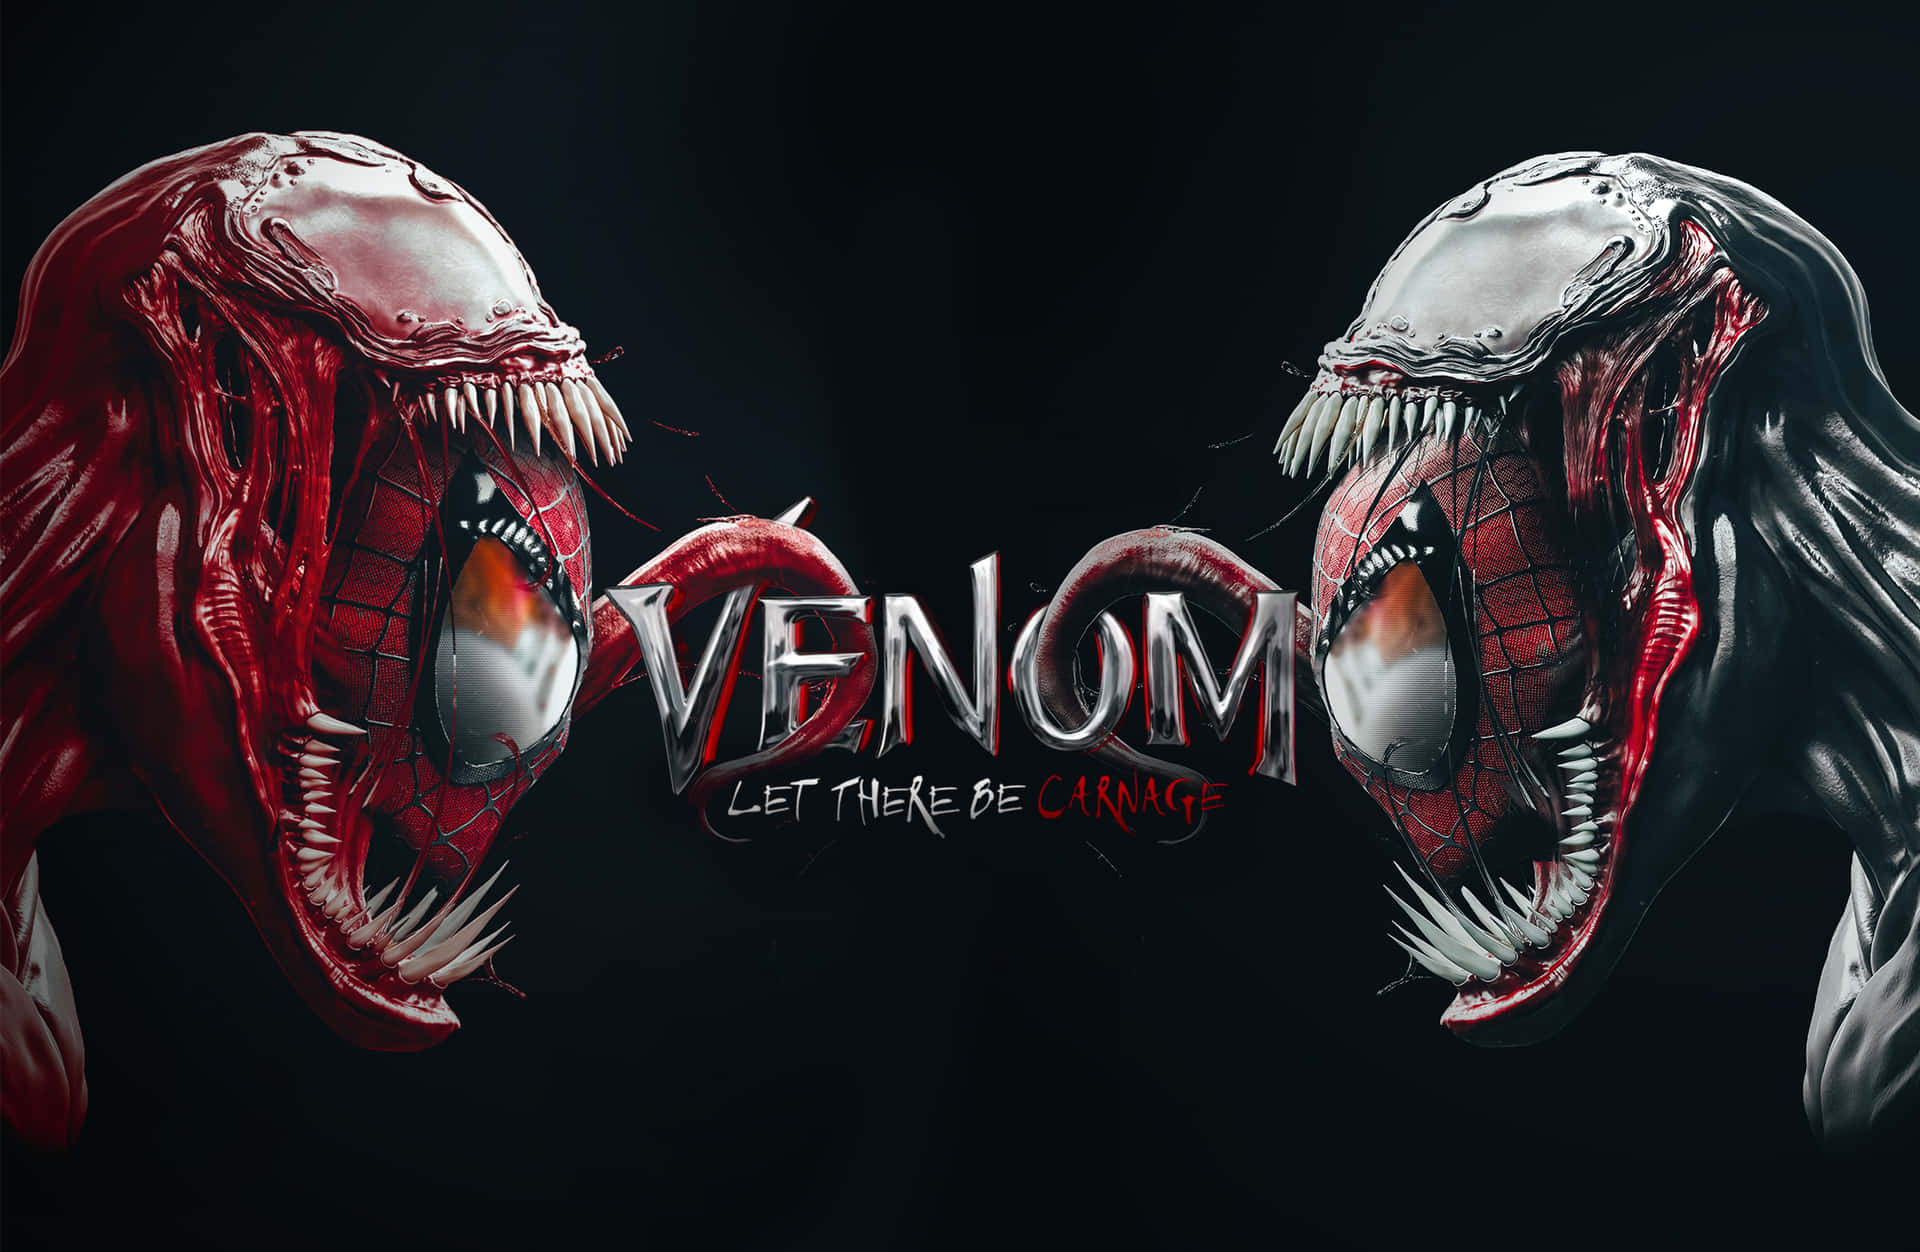 Carnage and Venom Face-off in an Intense Battle Wallpaper